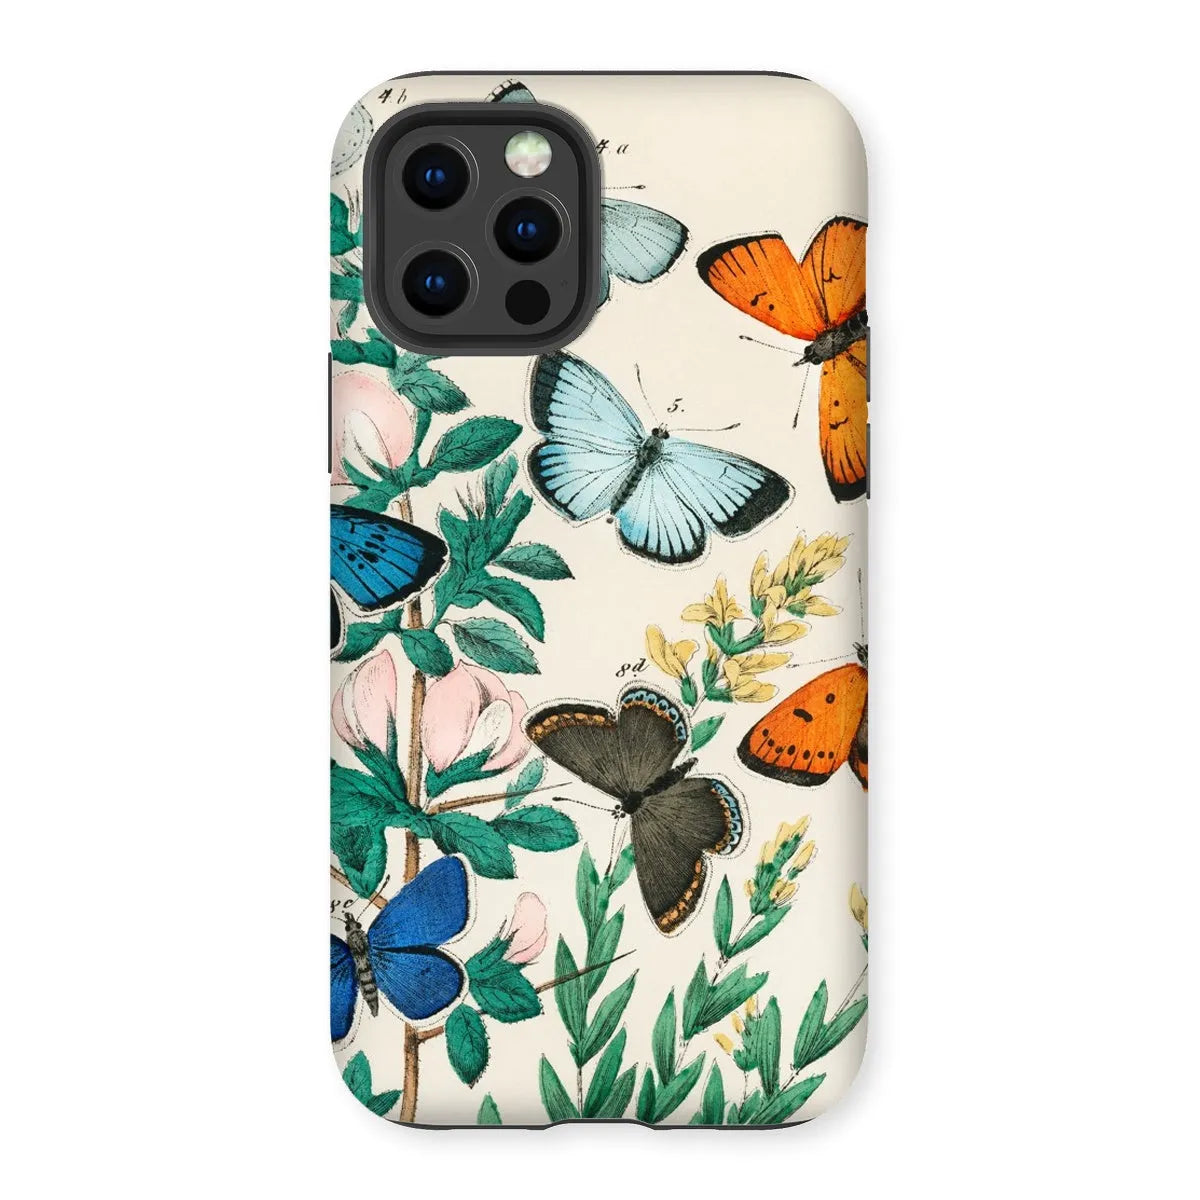 Another Butterfly Aesthetic Art Phone Case - William Forsell Kirby - Iphone 12 Pro / Matte - Mobile Phone Cases